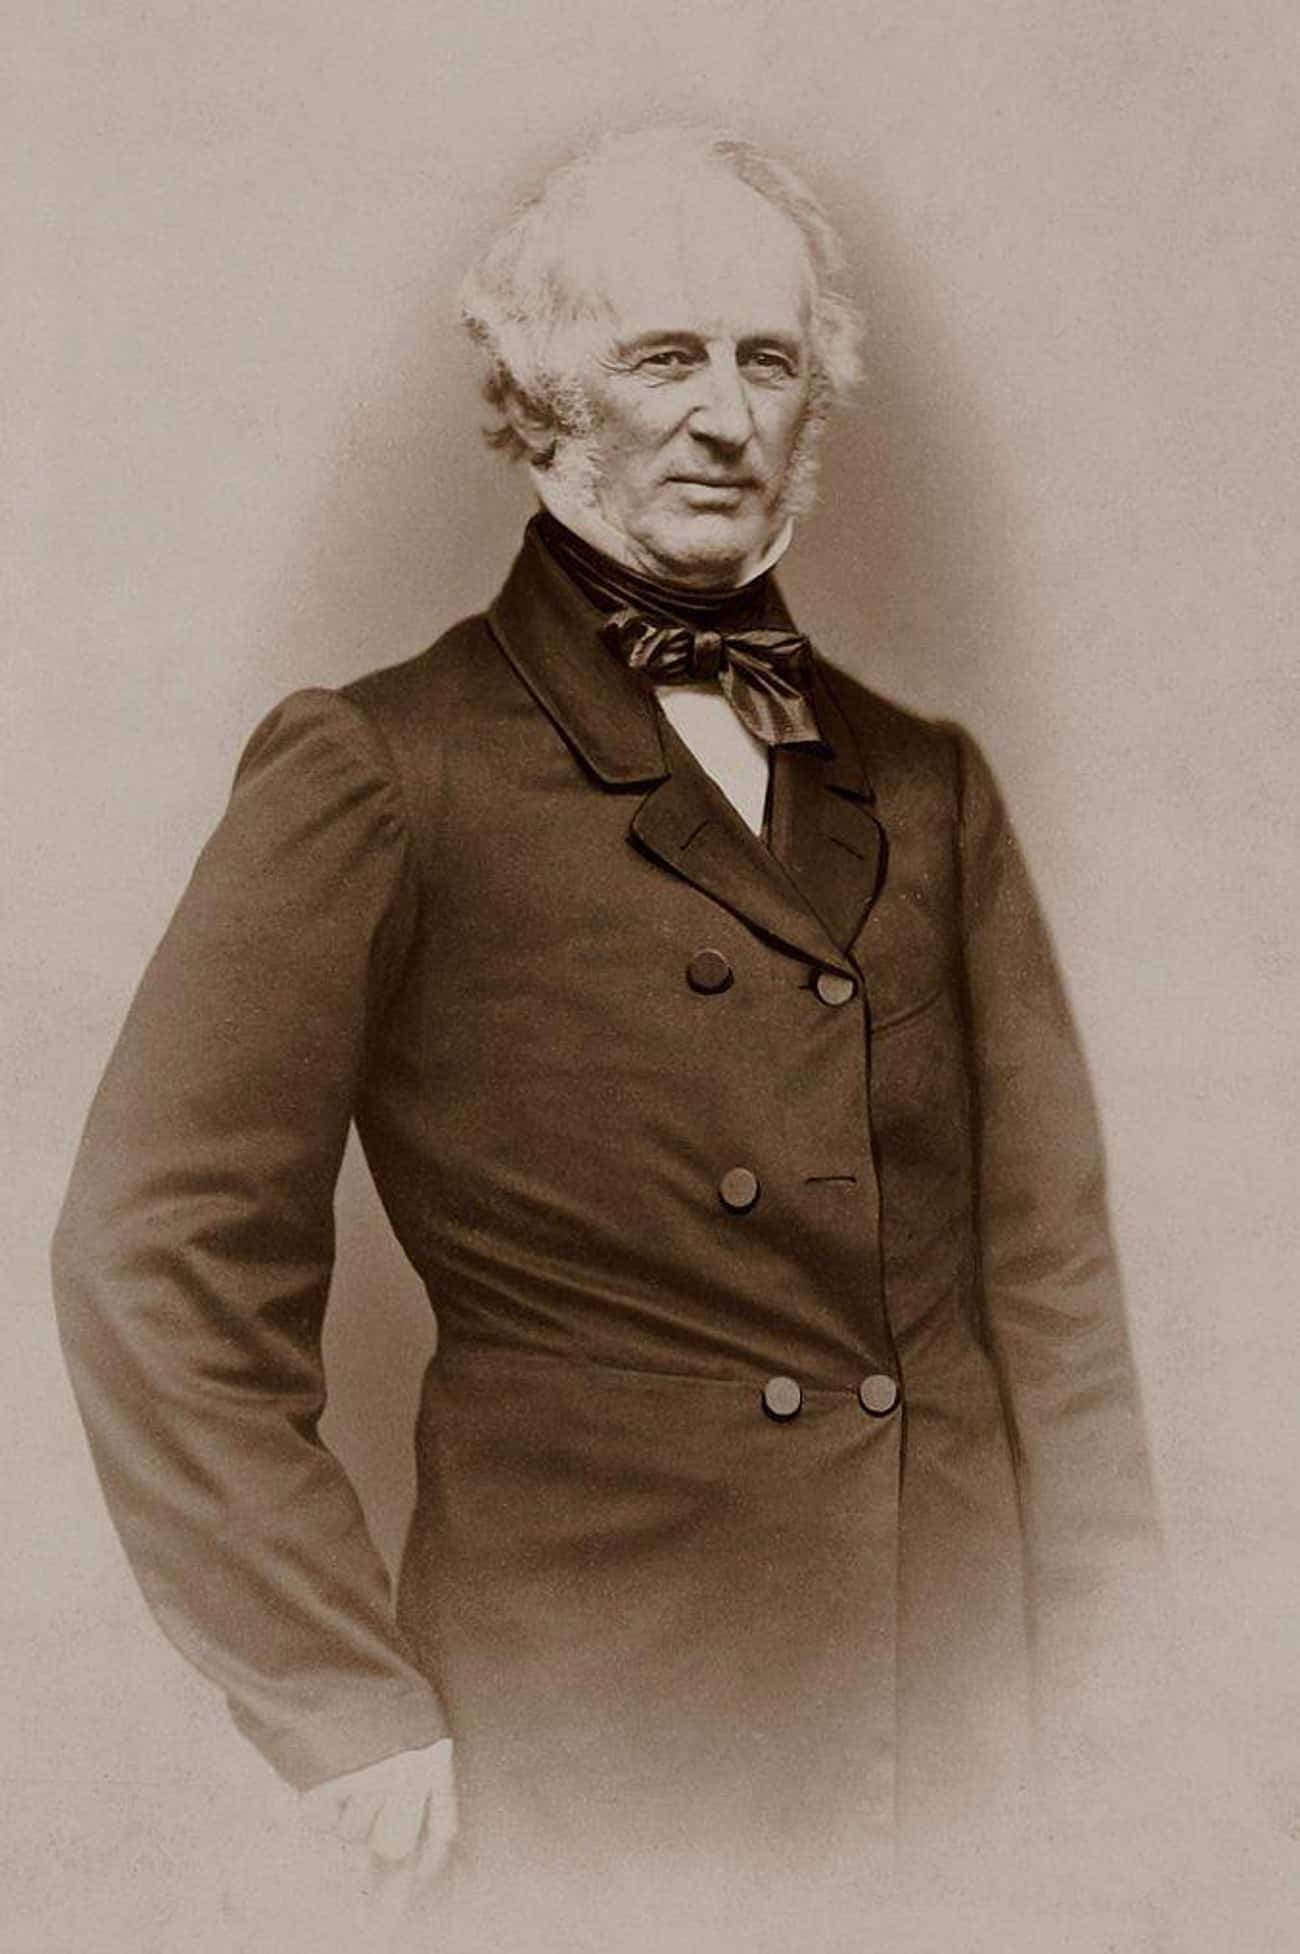 Cornelius &#34;Commodore&#34; Vanderbilt Started Building The Family Fortune From A $100 Loan